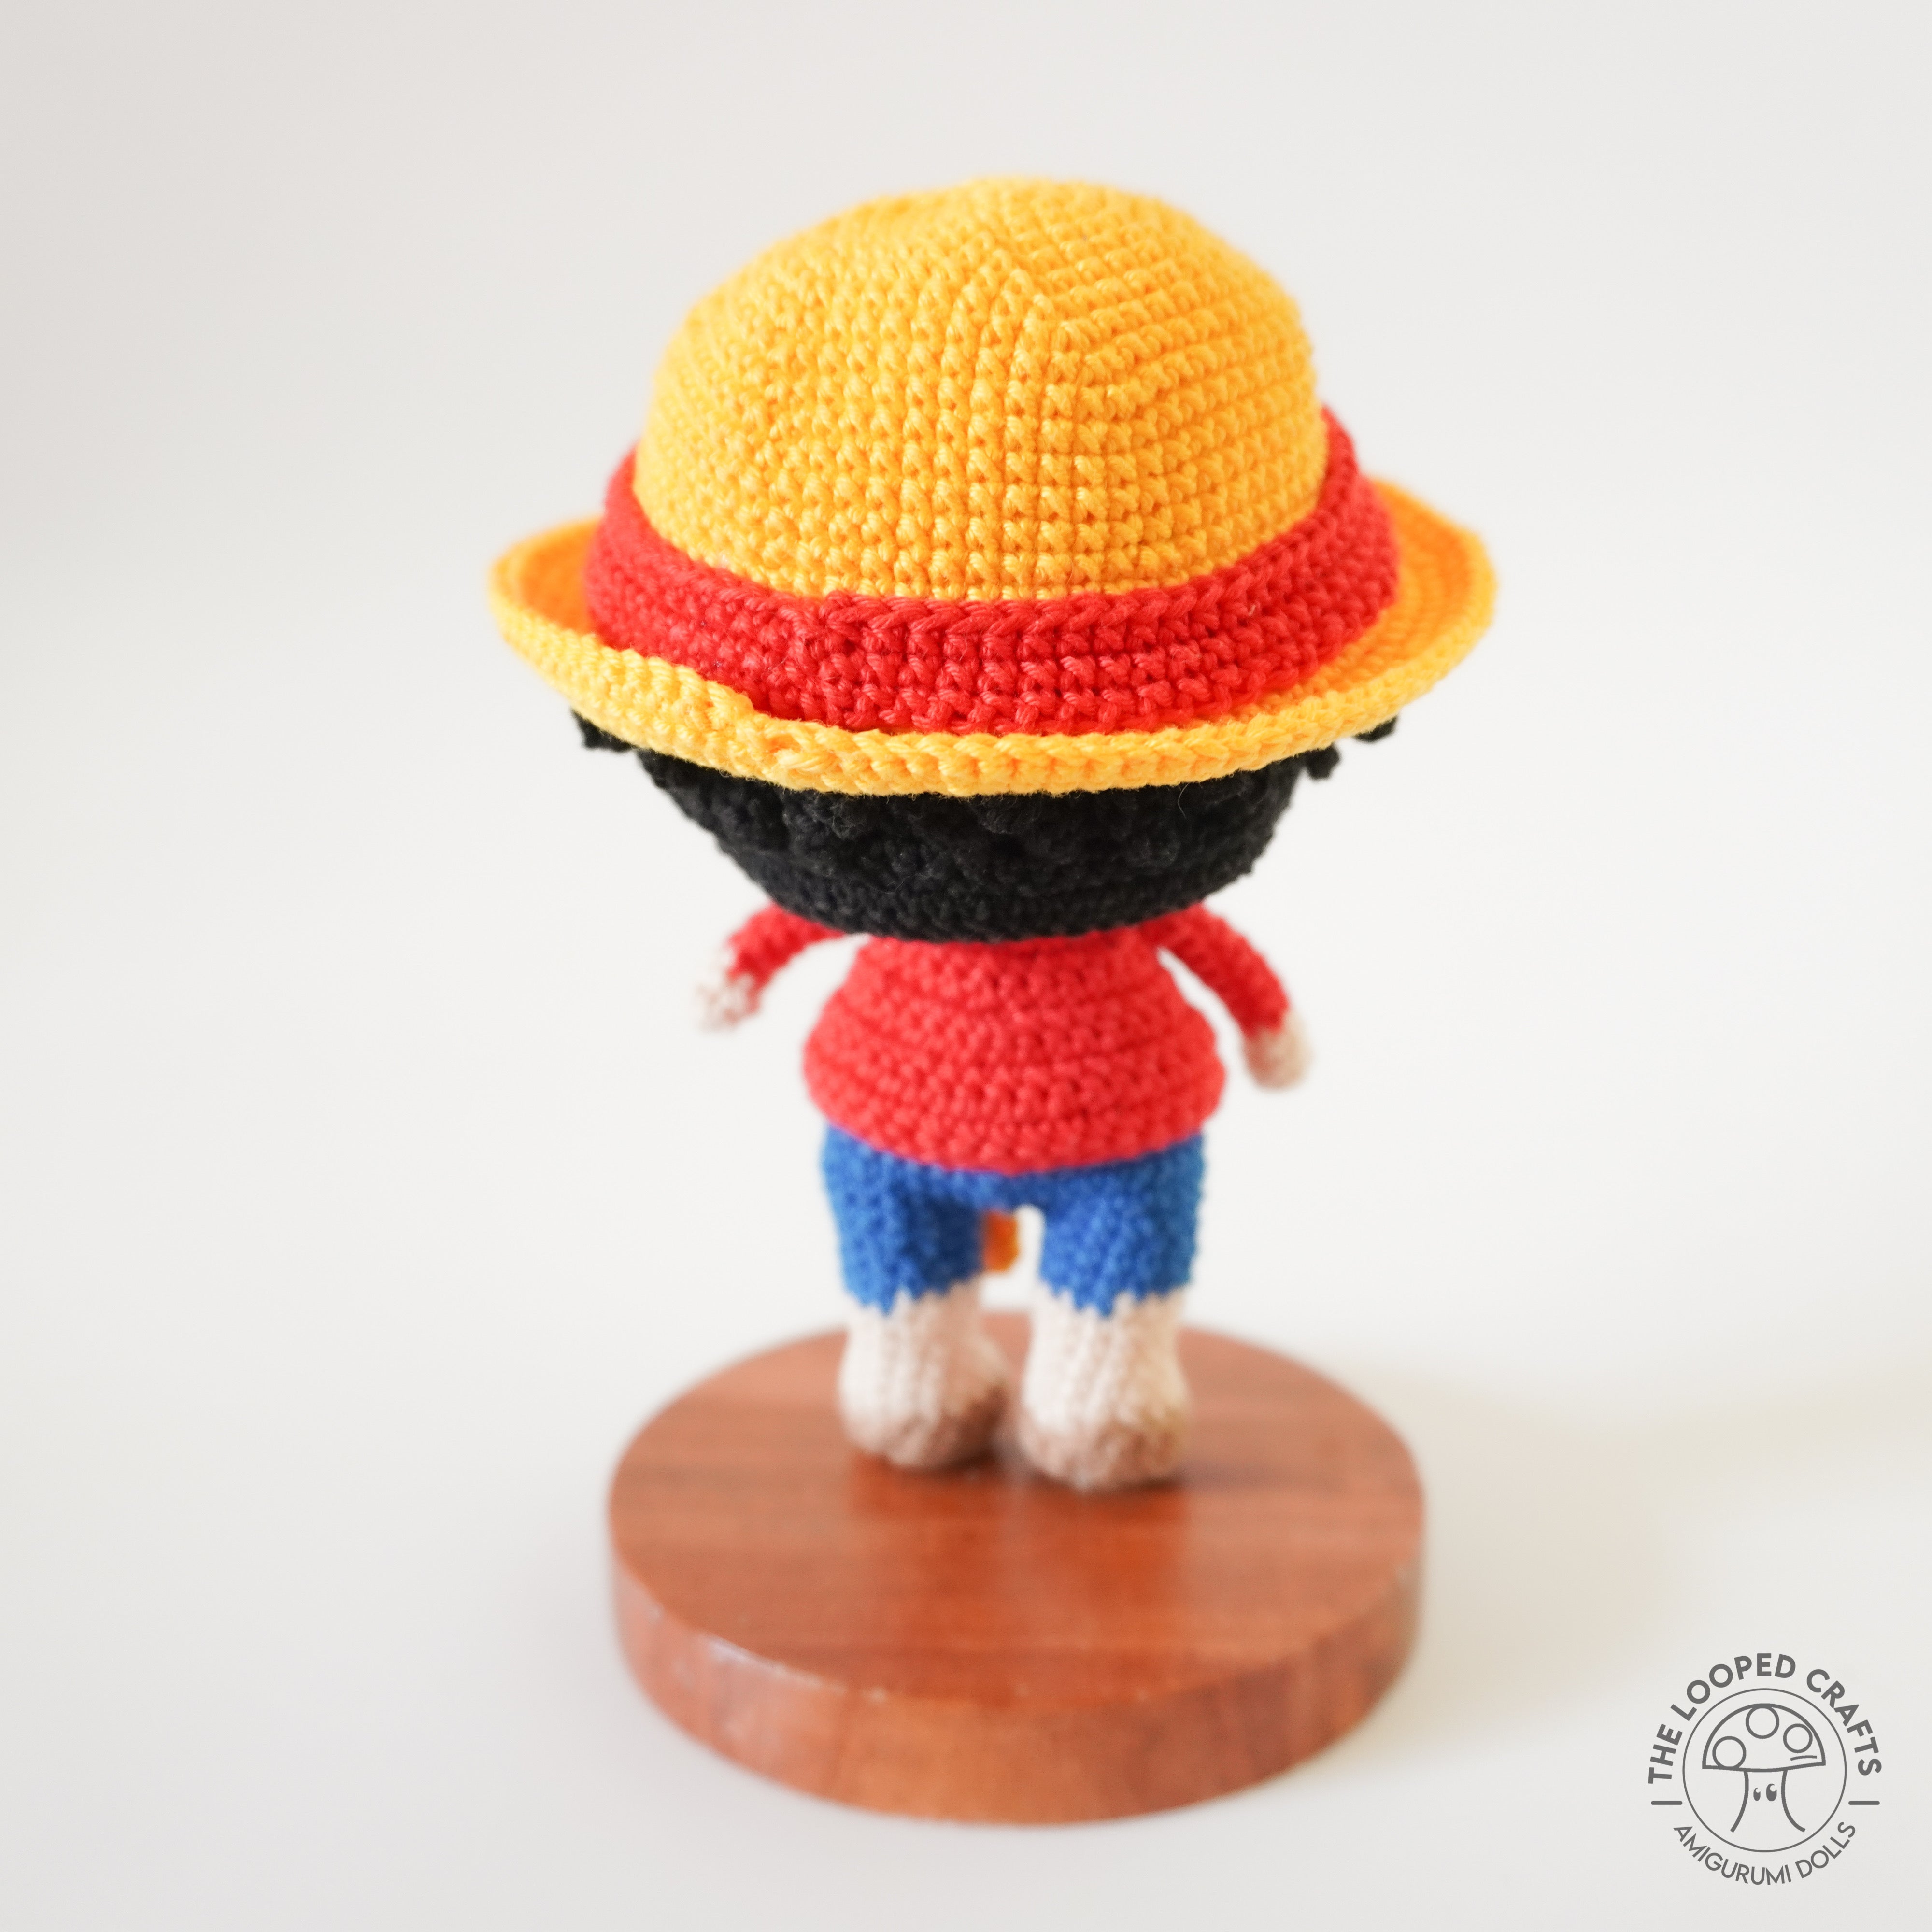 Ravelry: Standard Size Japanese Anime-style Doll pattern by Sweet Softies